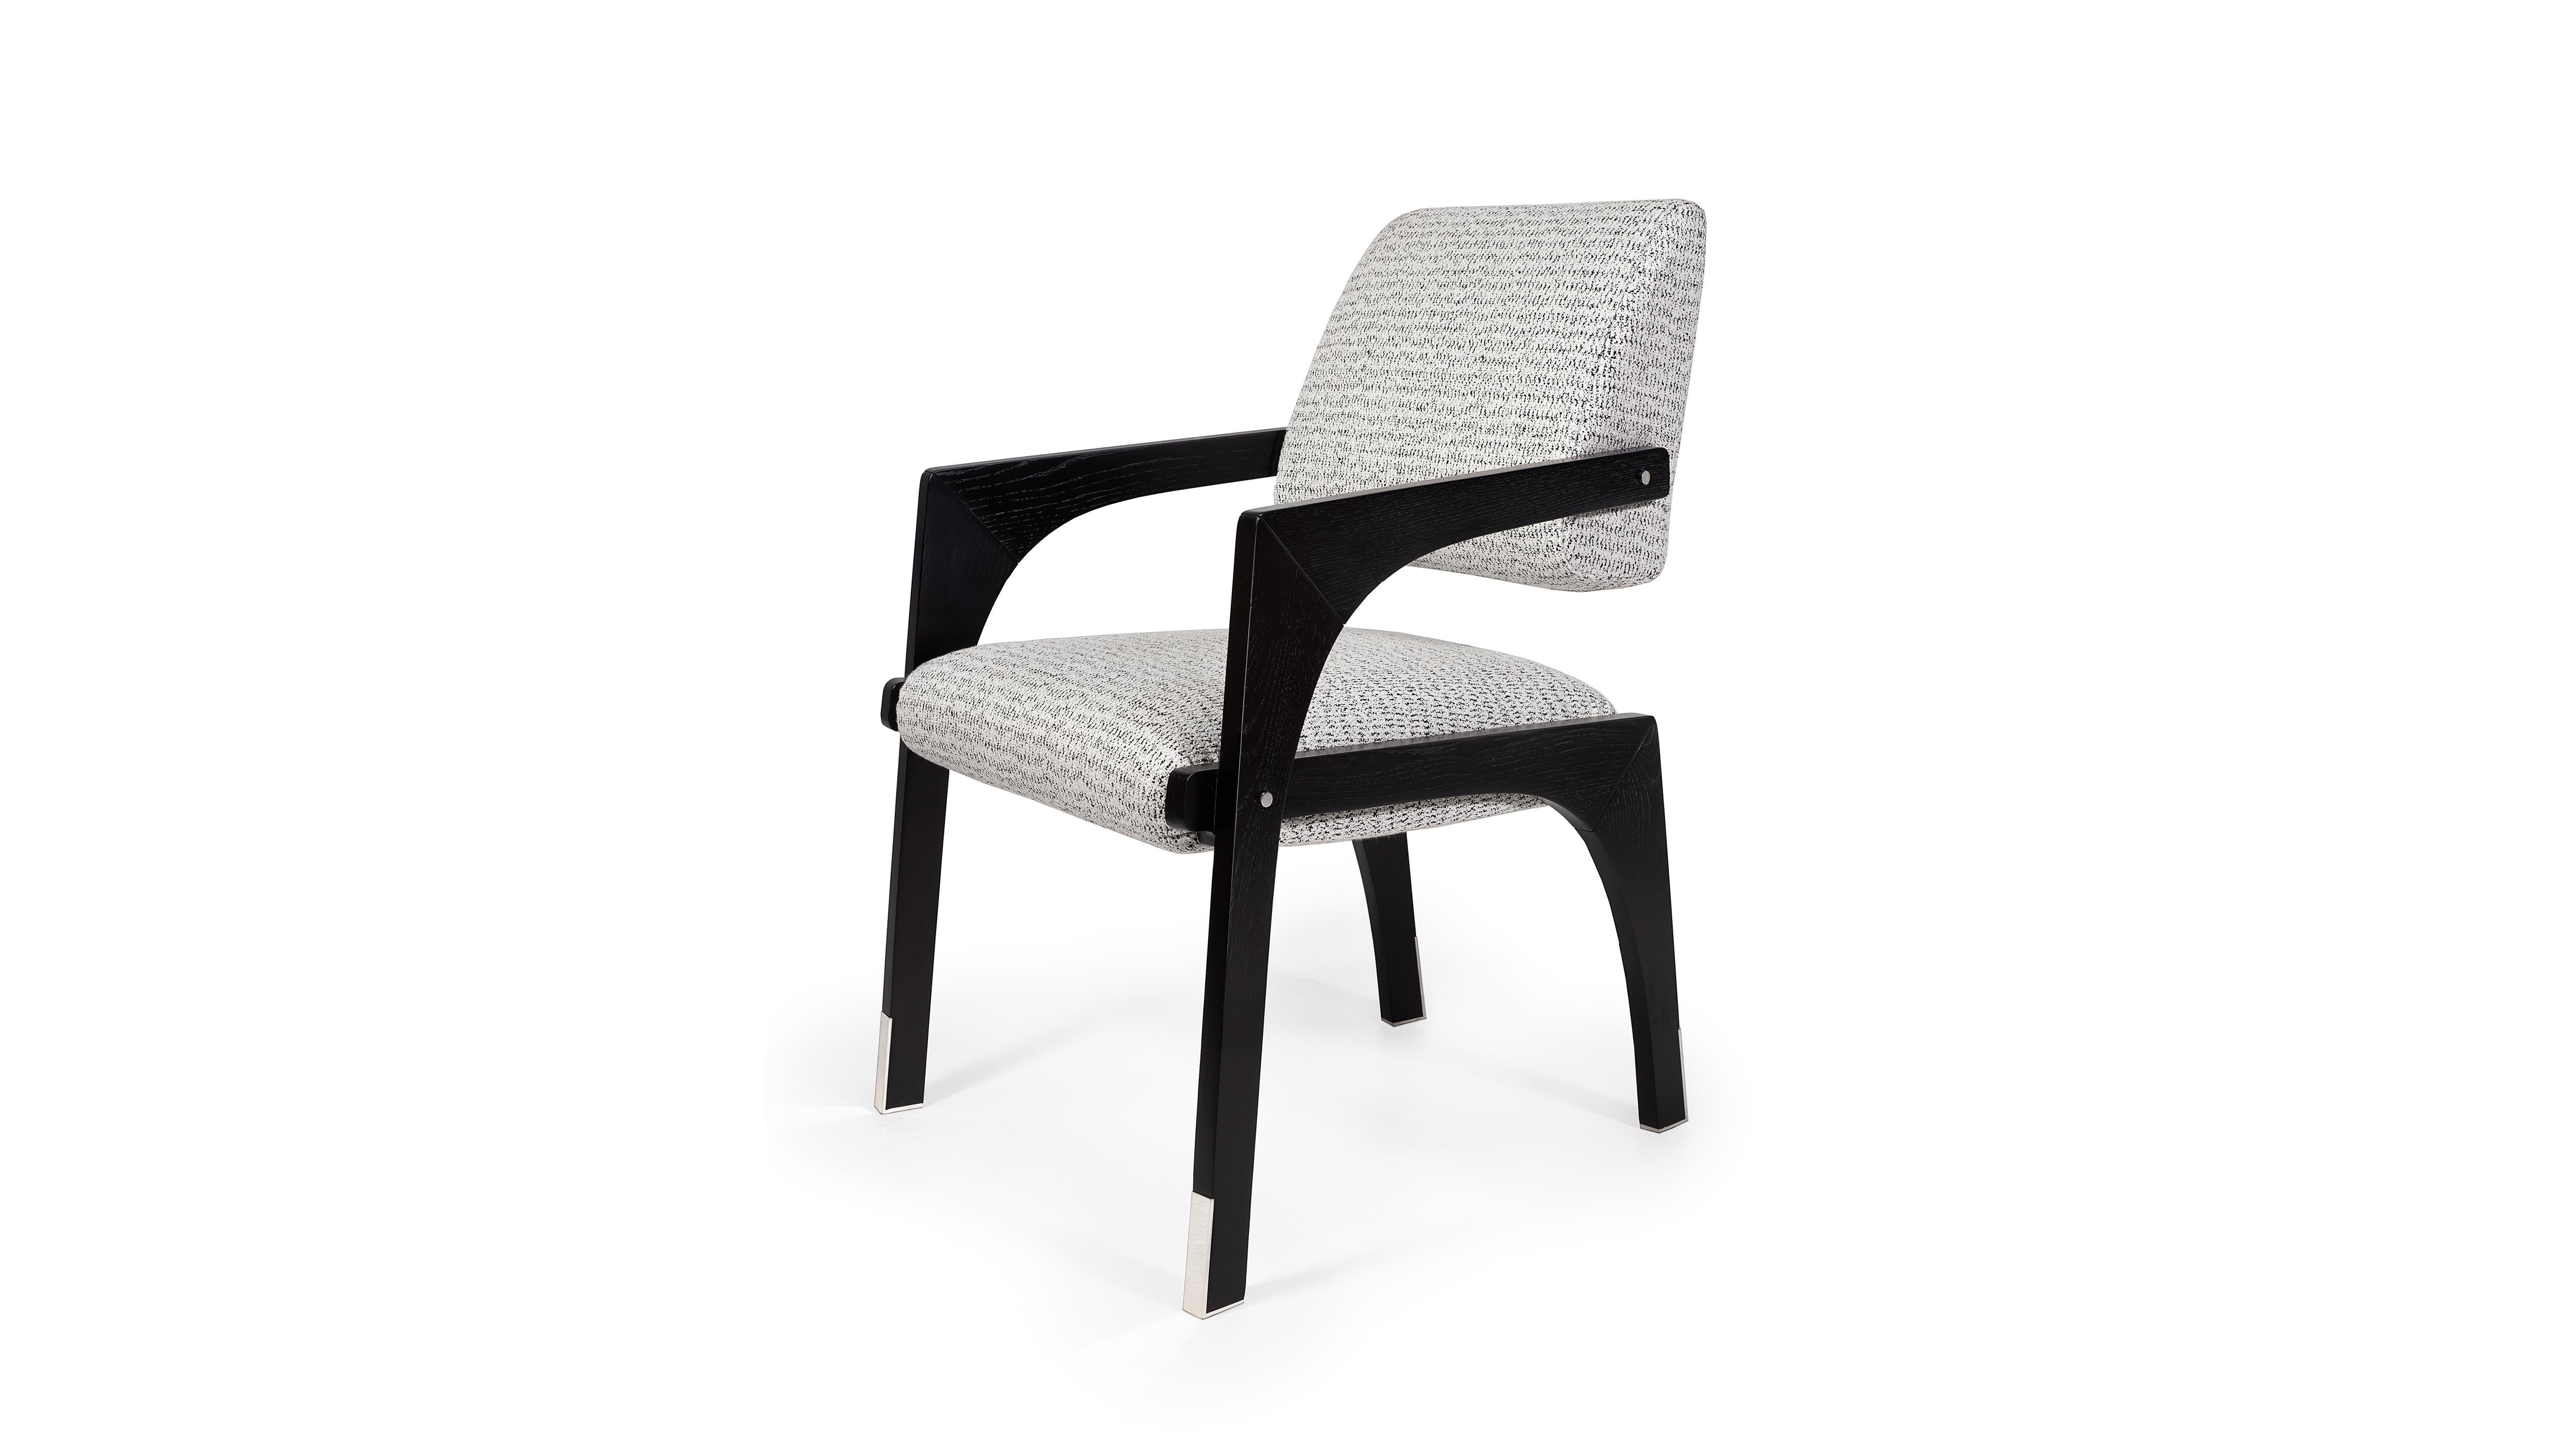 Arches Dining Chair by InsidherLand
Dimensions: D 67 x W 59 x H 89 cm.
Materials: Black lacquered wooden frame, stainless steel, fabric InsidherLand Fusion ref. 992.
11 kg.
Available in different fabrics.

Since the Renaissance, many attempts have